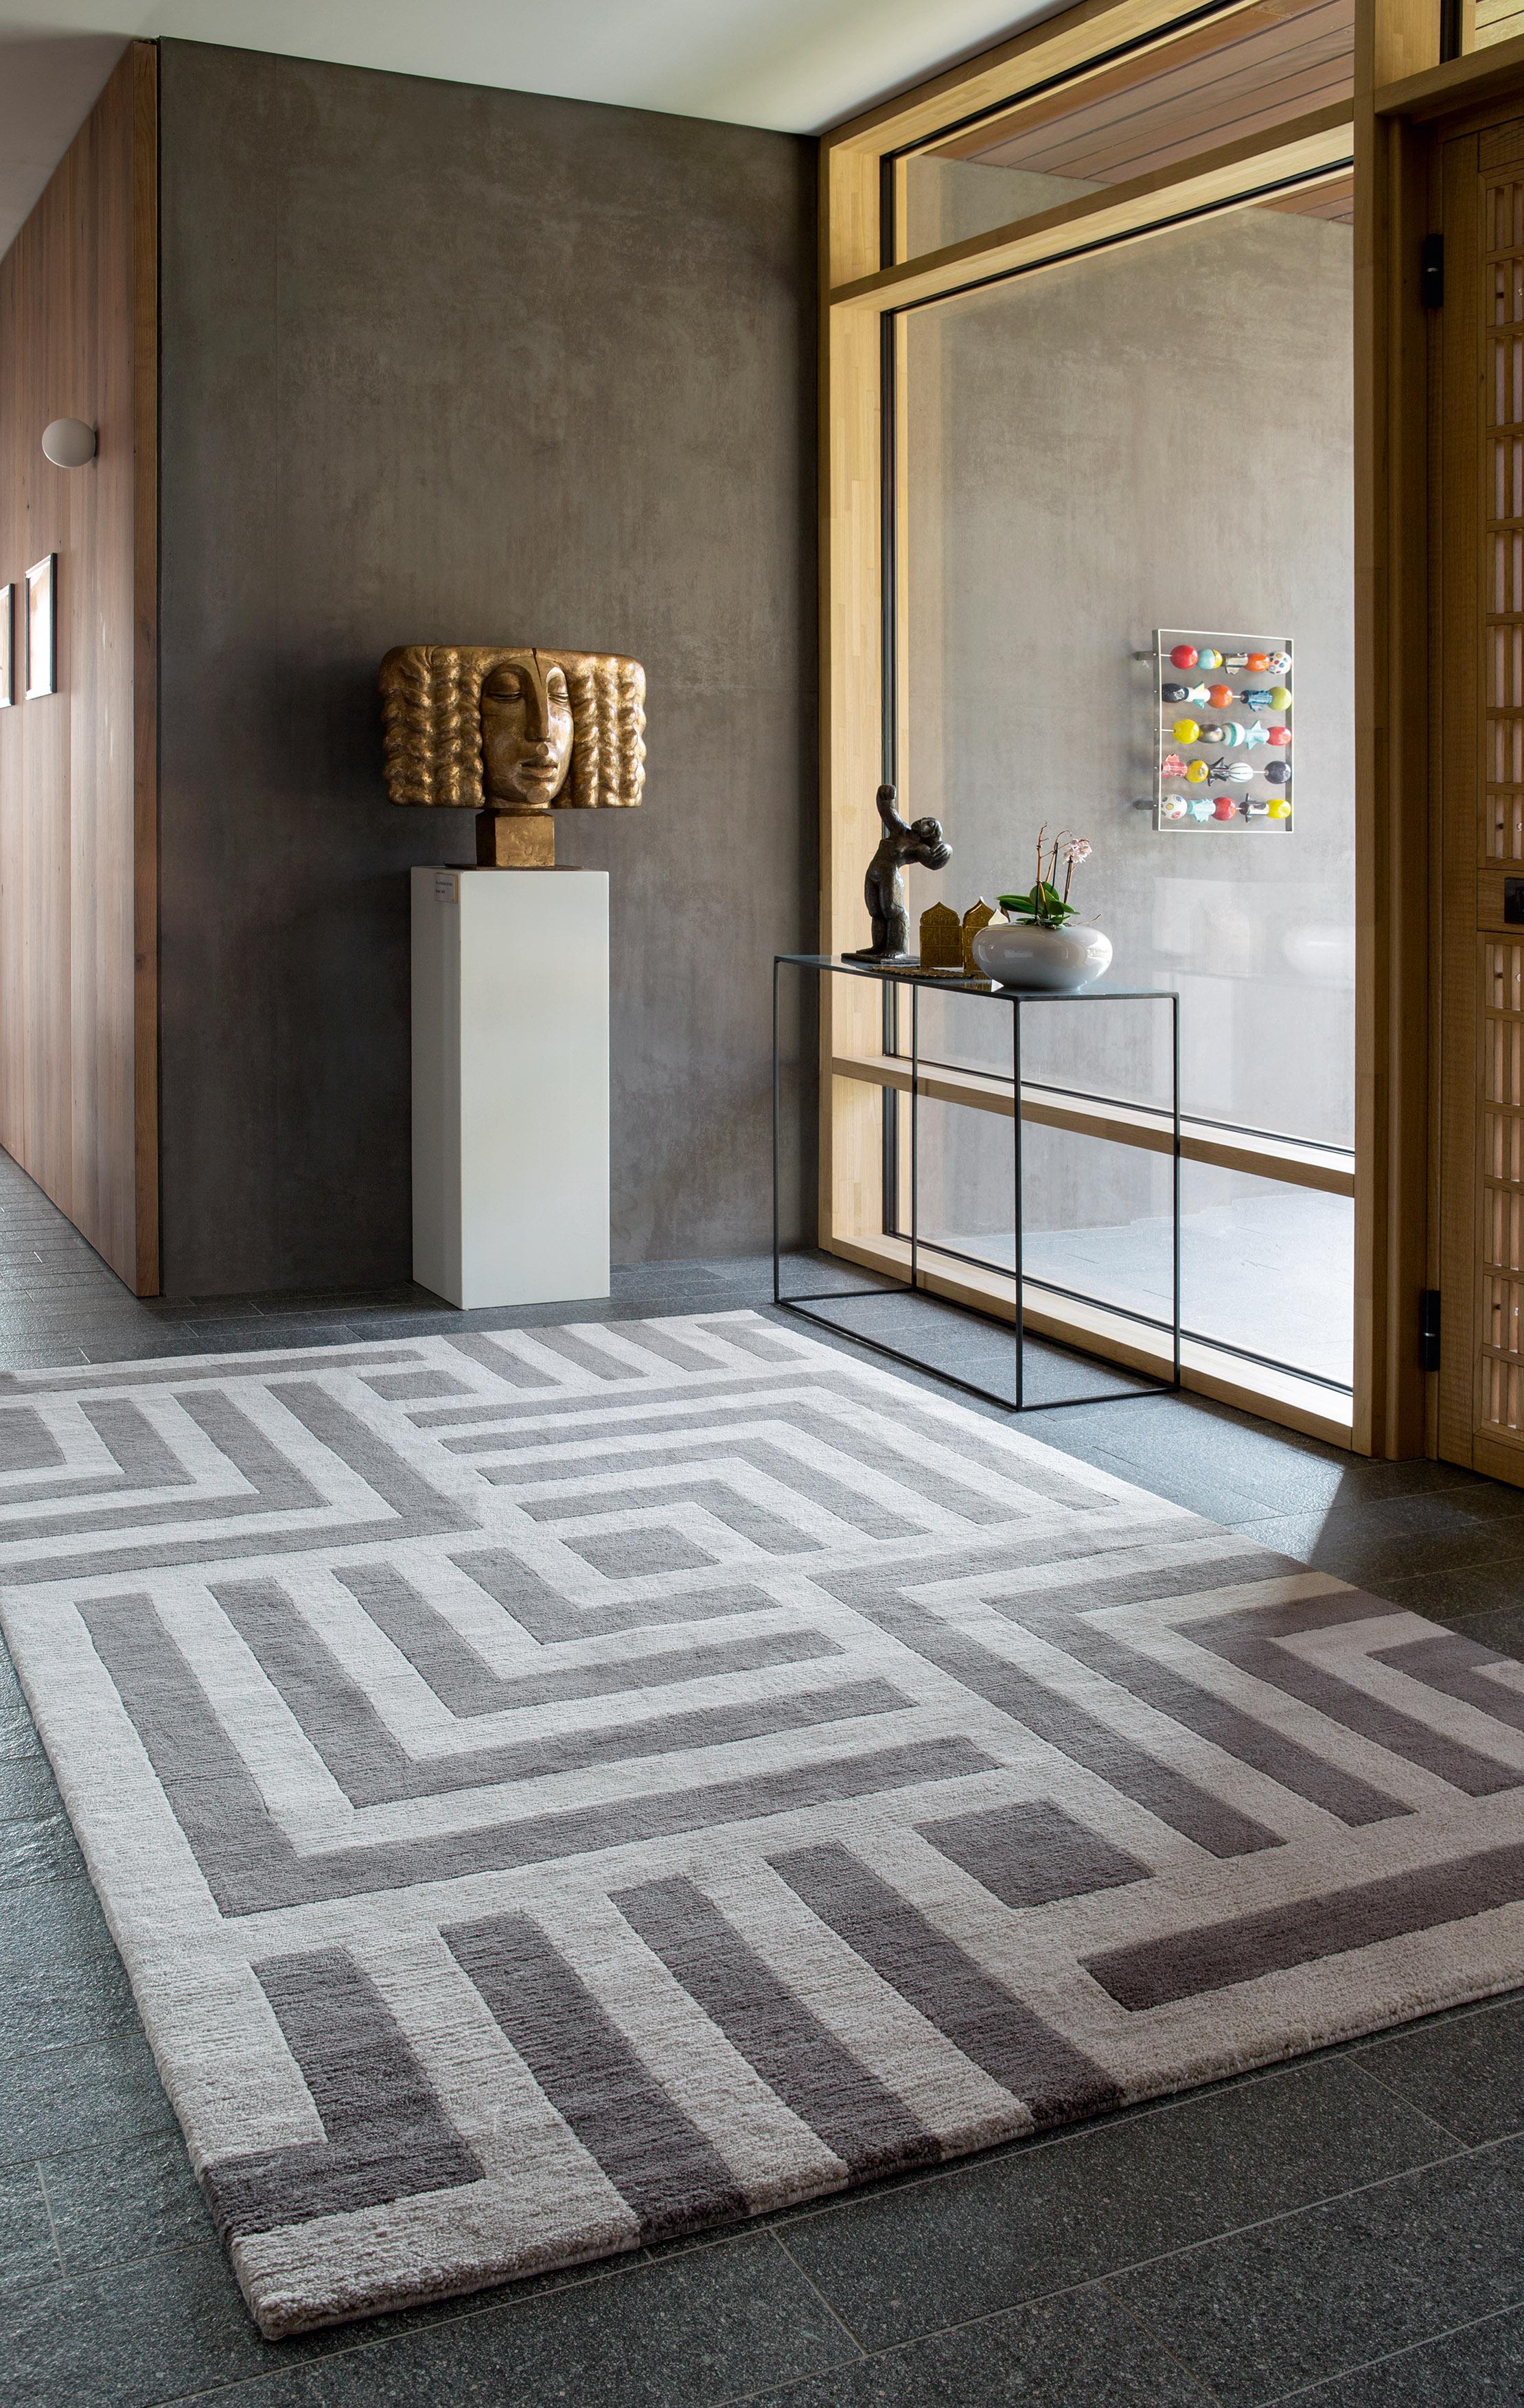 Features a series of interlocking grids in a sophisticated neutral palette, Pallas is a statement design which can be used in both contemporary and traditional interiors. This rug is entirely handcrafted from the finest Tibetan wool by our master